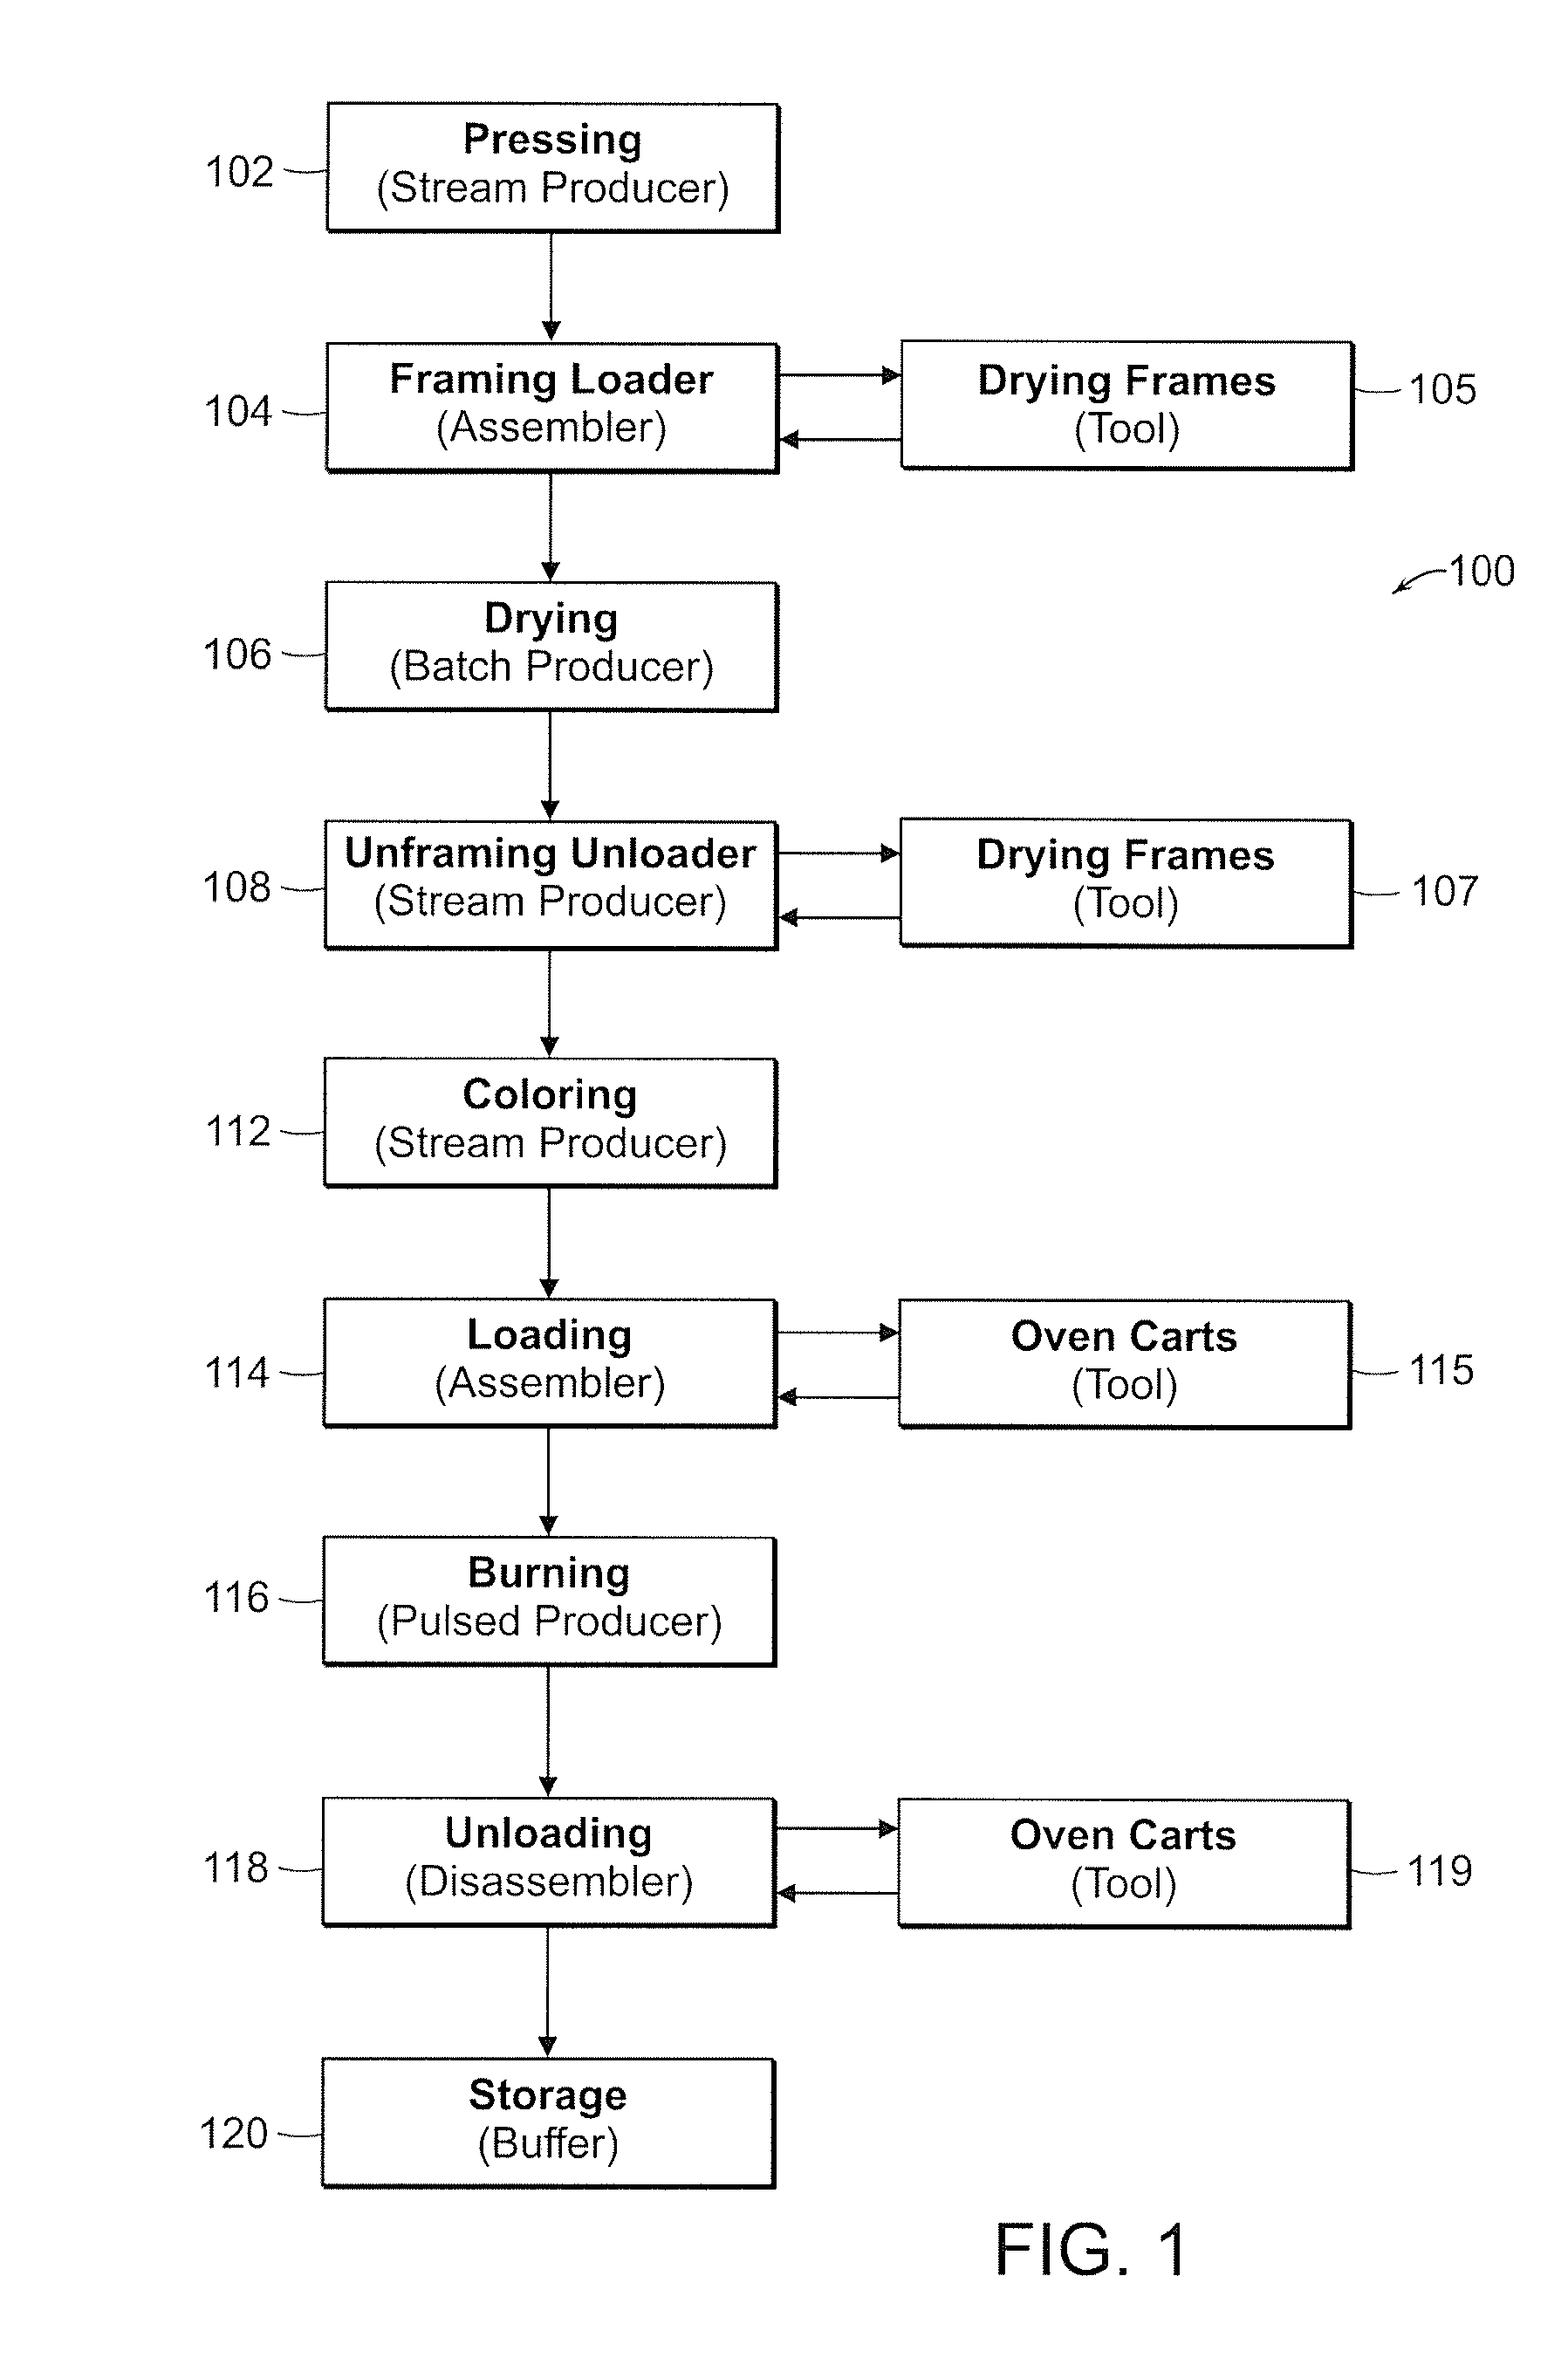 System and method for the production of goods or products